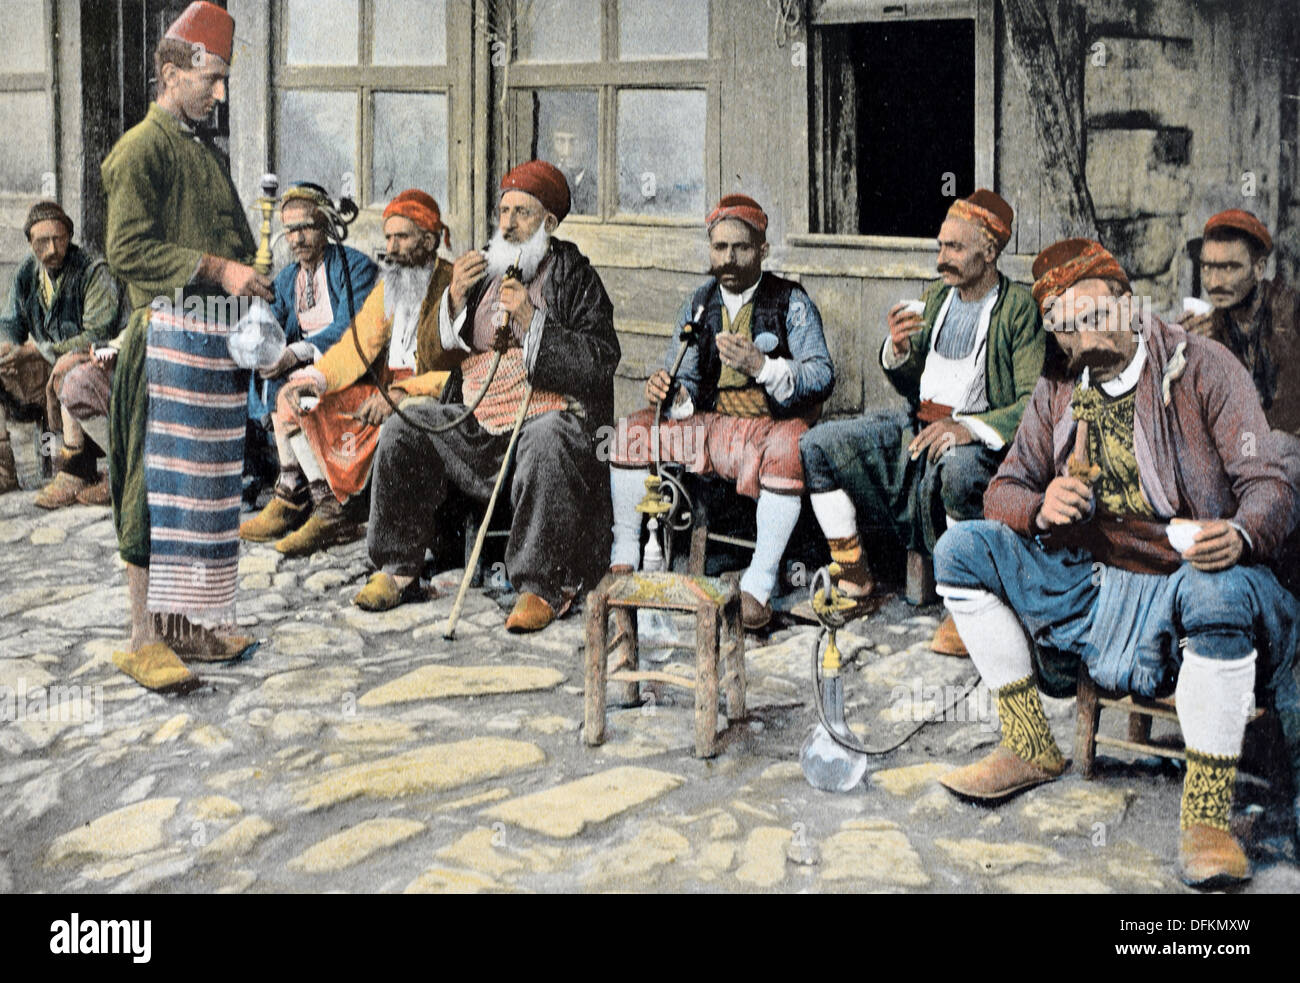 Turkish Ottoman Men Smoking Waterpipes or Narghiles Outside a Cafe or Coffee Shop Istanbul or Constantinople Turkey Stock Photo